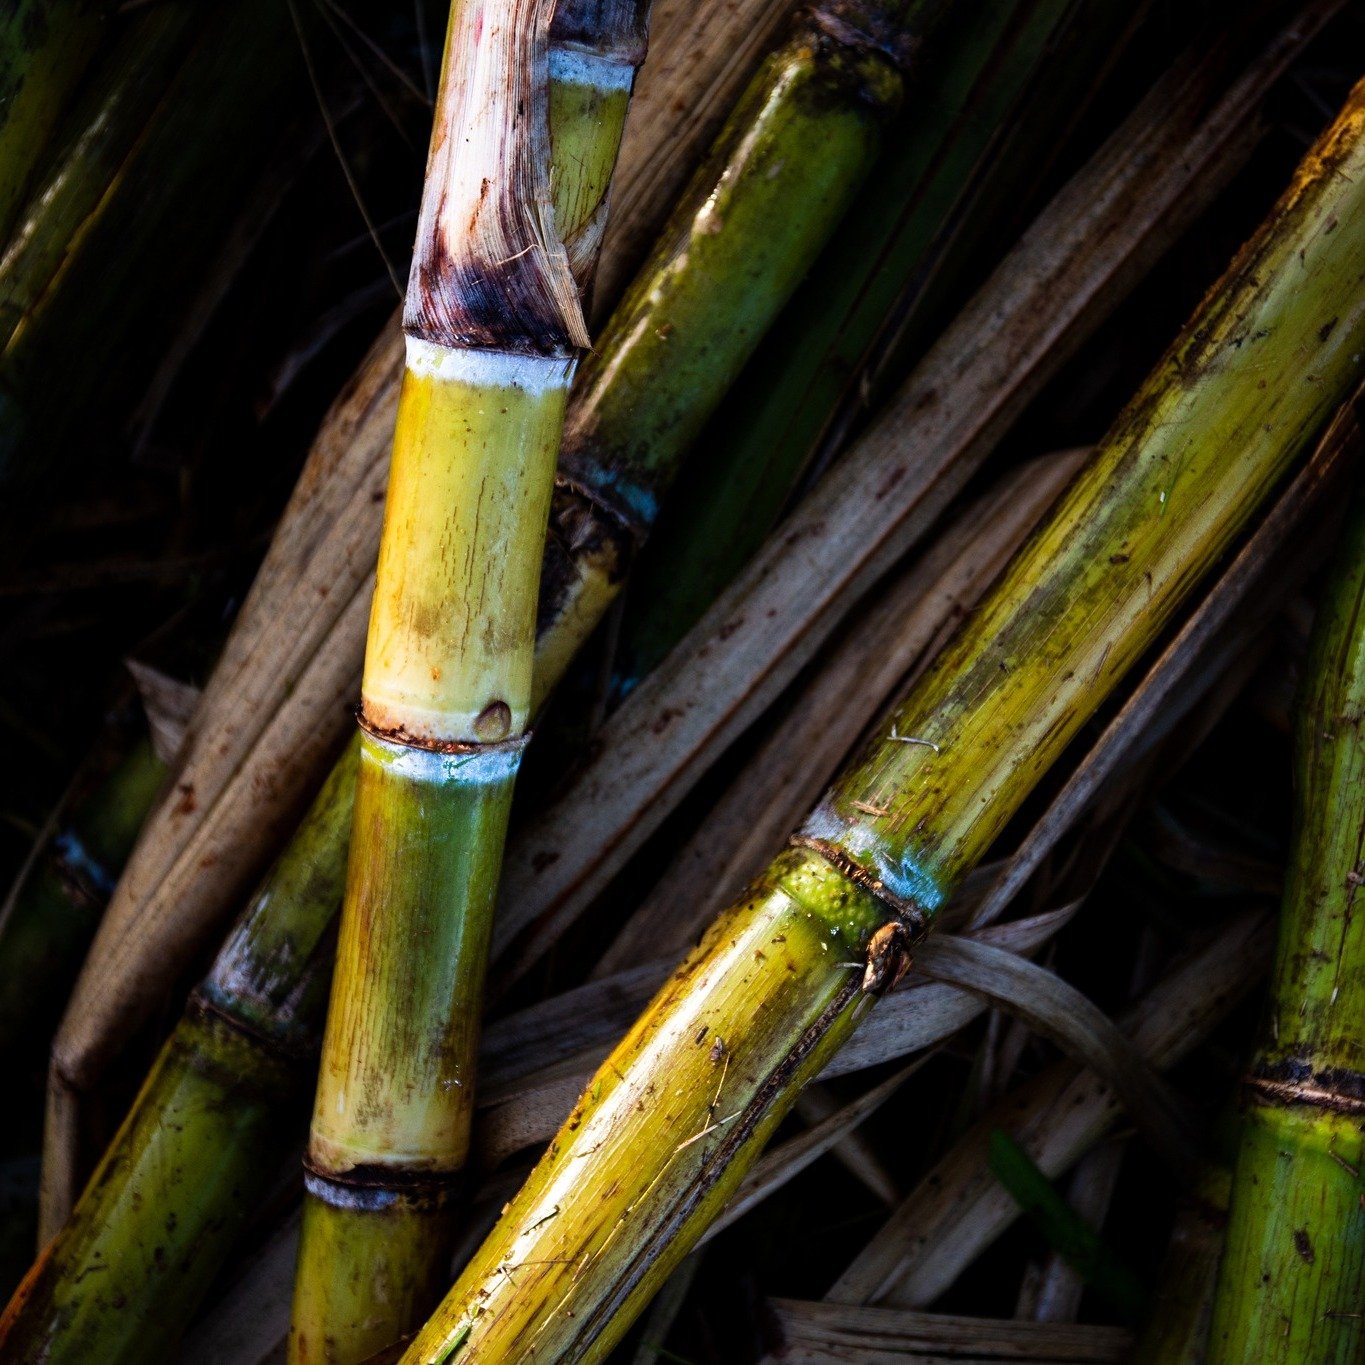 Did you know? Kō (sugarcane) has been a Hawaiian staple for over 1000 years! Every varietal of cane has a story and flavor profile of its own. At Kō Hana Distillers, our hope is to honor and celebrate the kō we have the privilege of planting and grow